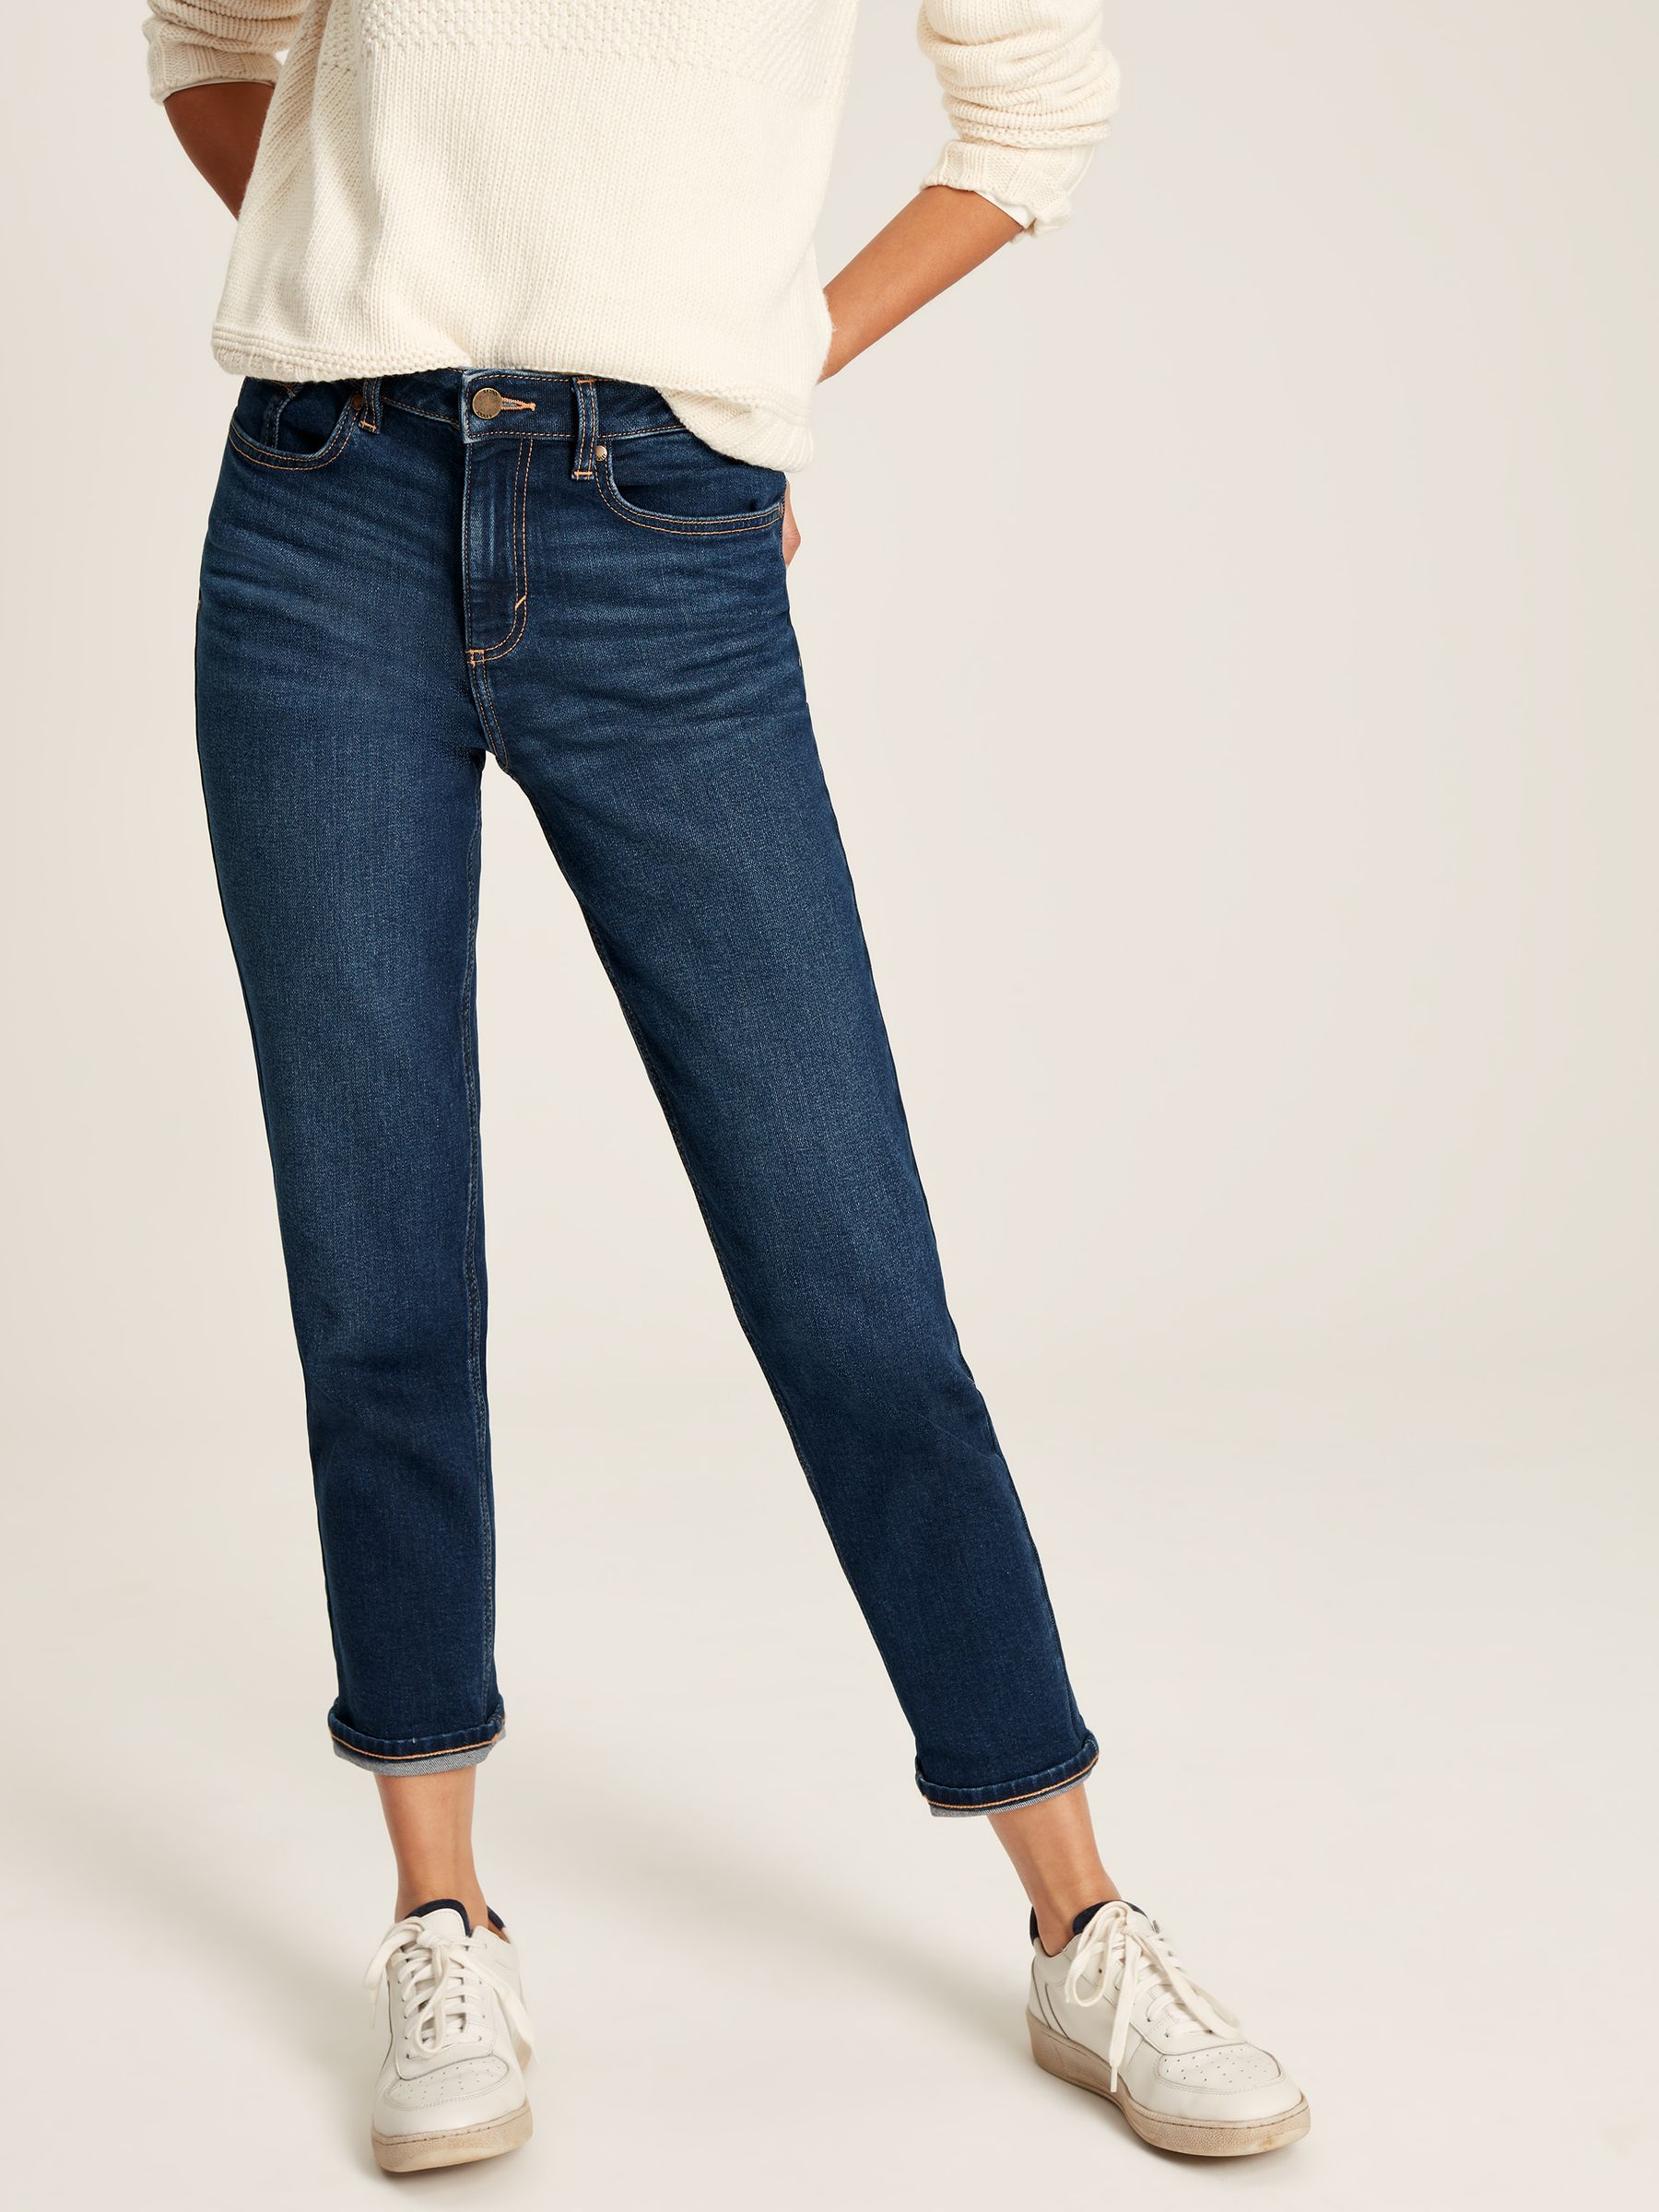 Buy Blue Mid Rise Straight Leg Jeans from the Joules online shop